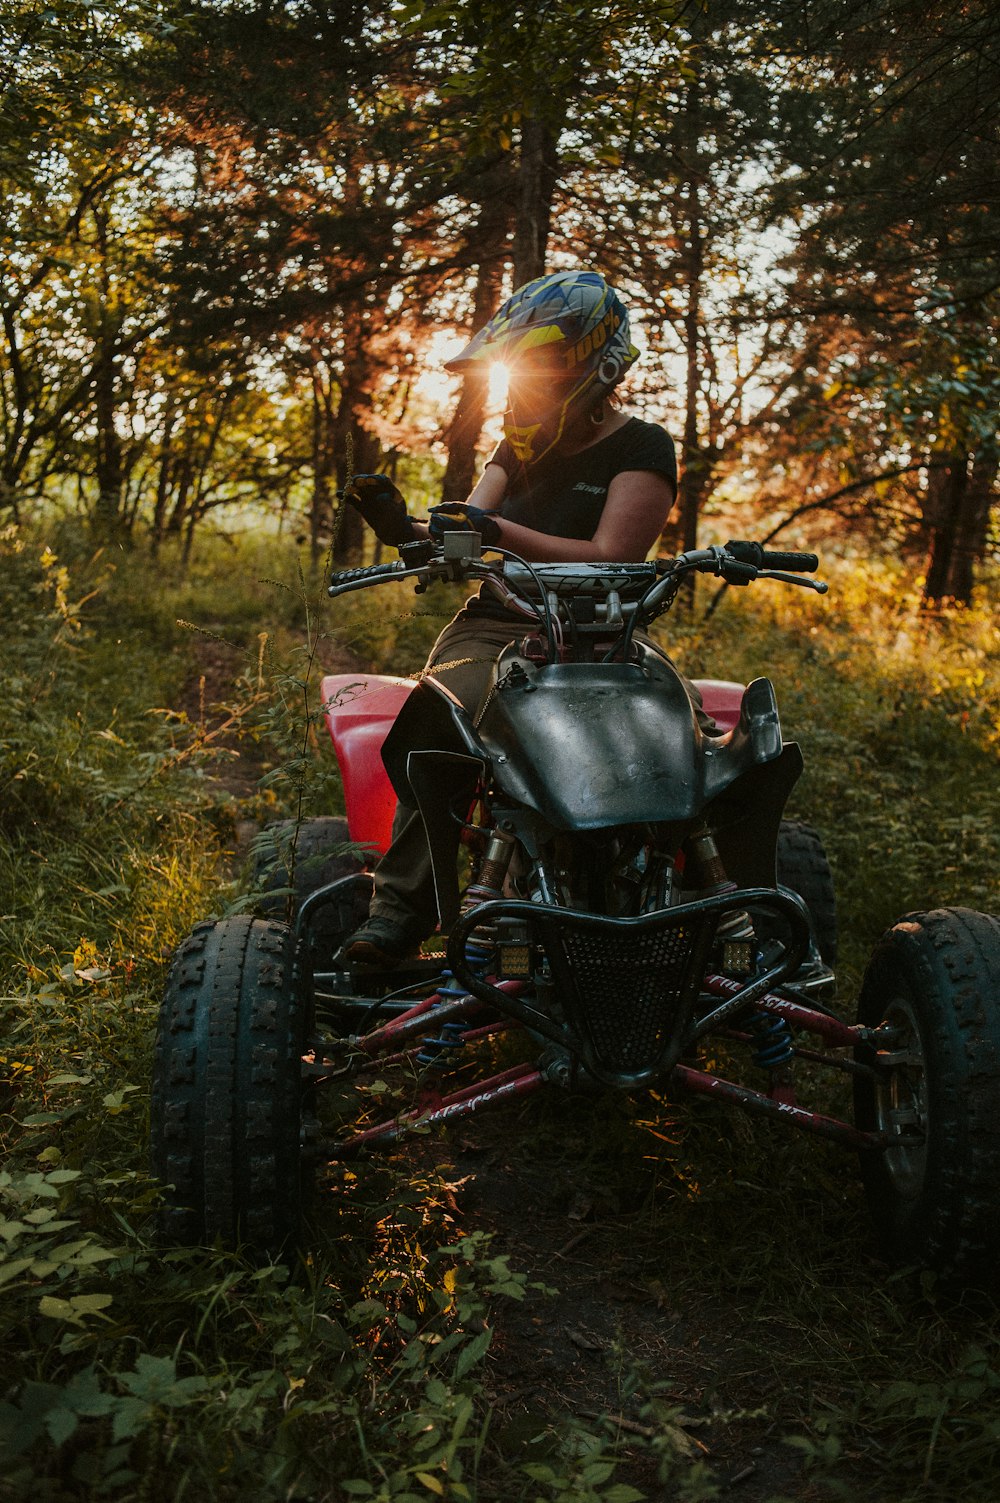 a person riding an atv in the woods